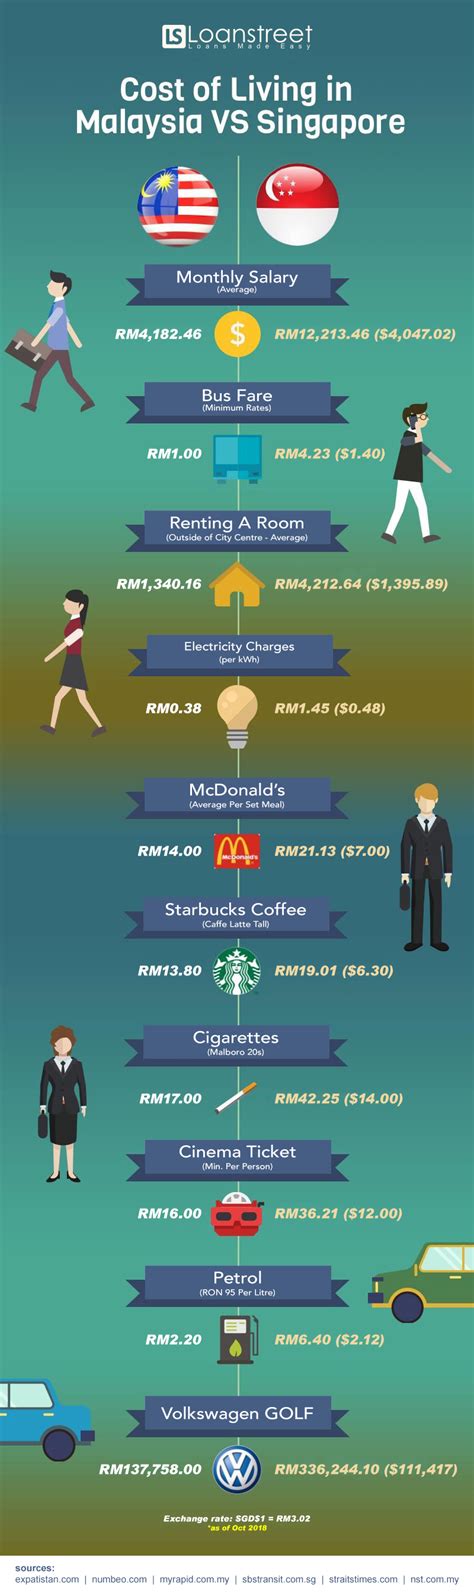 We track tons of information for over 600 cities around the world. Cost of Living in Malaysia vs Singapore